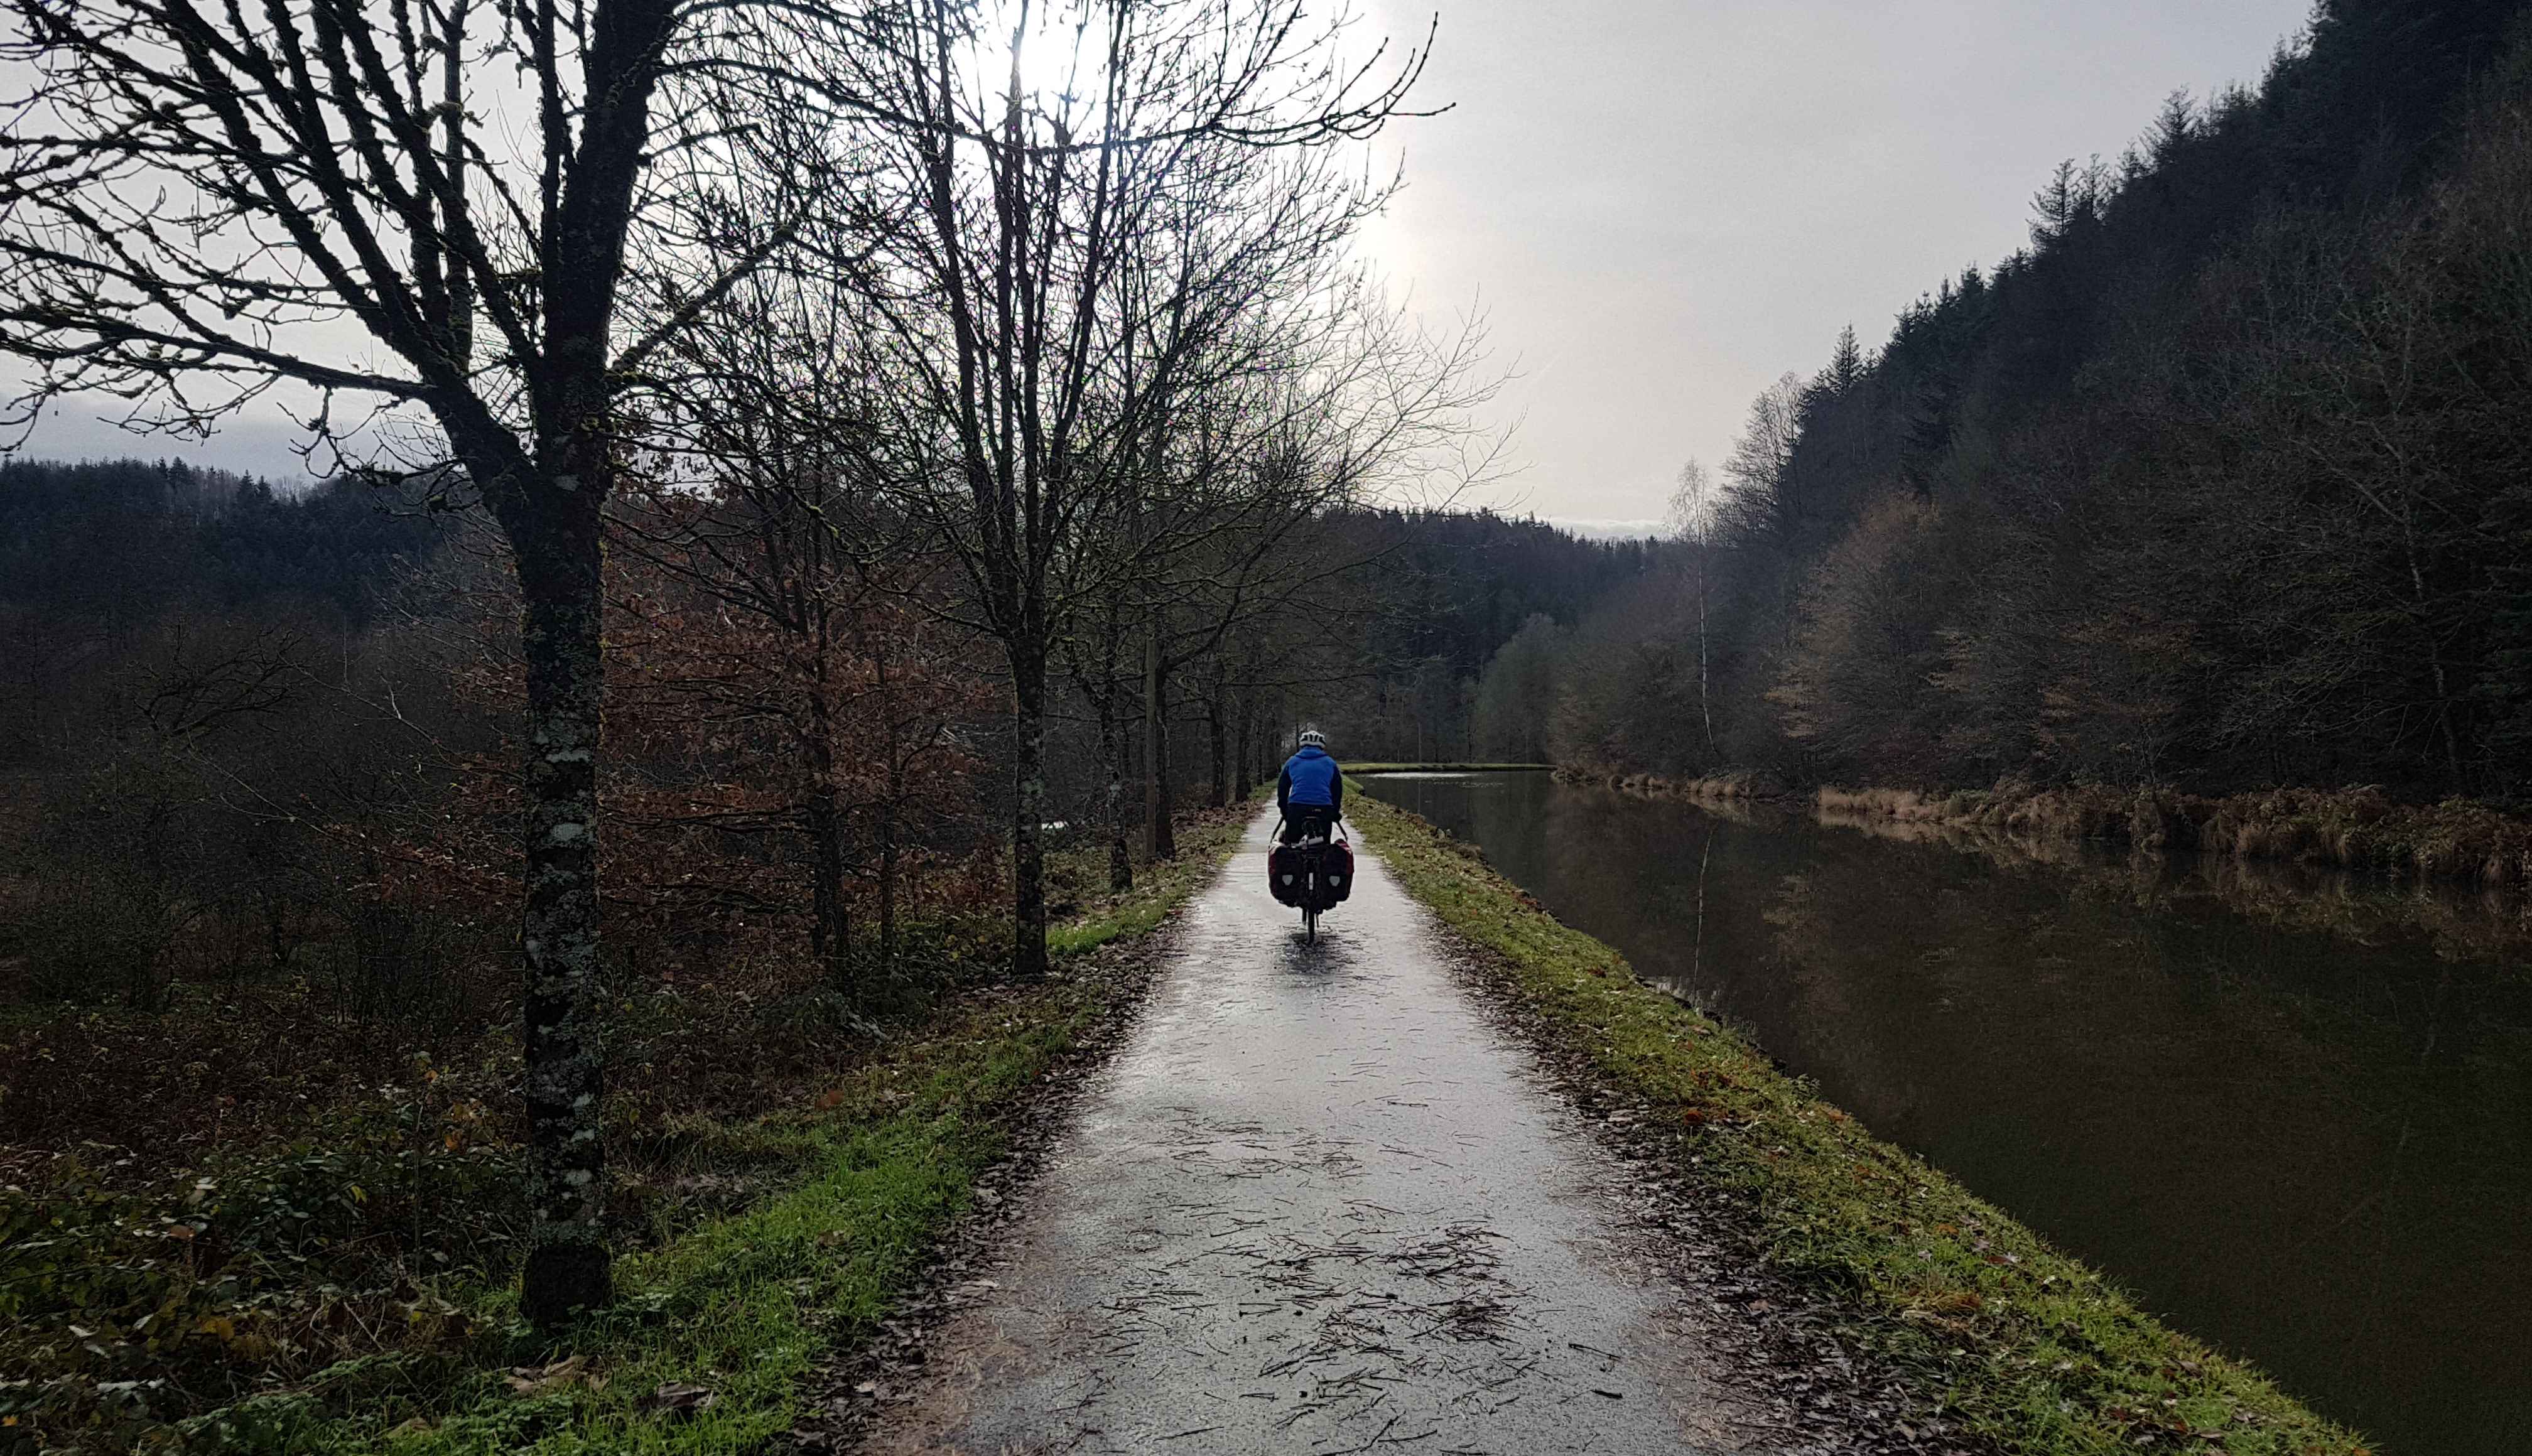 Easy cycling along a canal, just next to the river Moselle